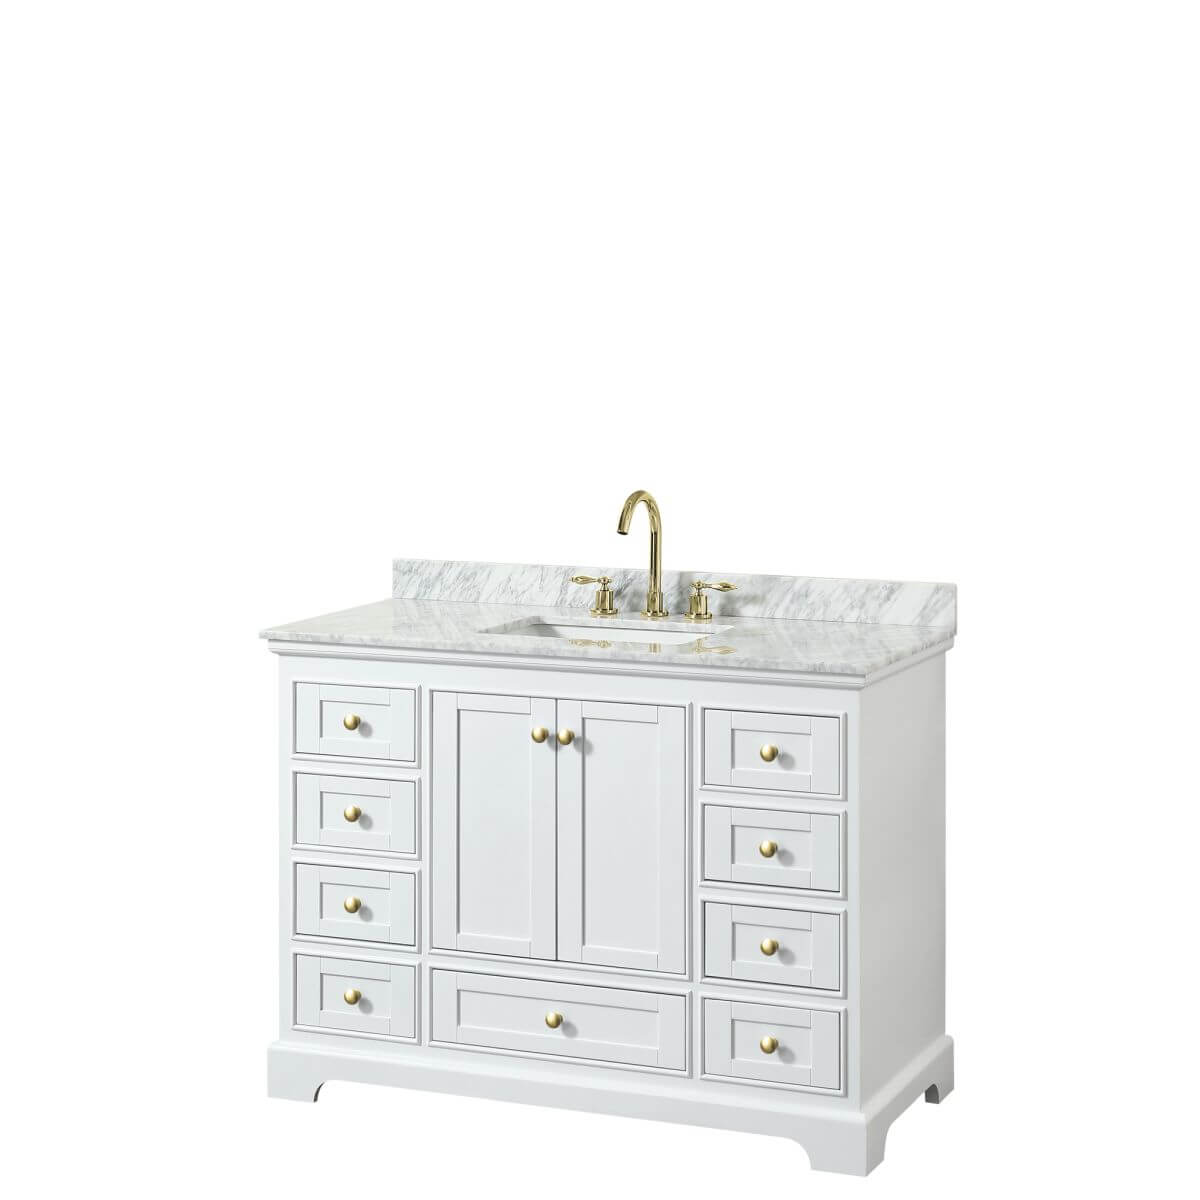 Wyndham Collection Deborah 48 inch Single Bathroom Vanity in White with White Carrara Marble Countertop, Undermount Square Sink, Brushed Gold Trim and No Mirror - WCS202048SWGCMUNSMXX